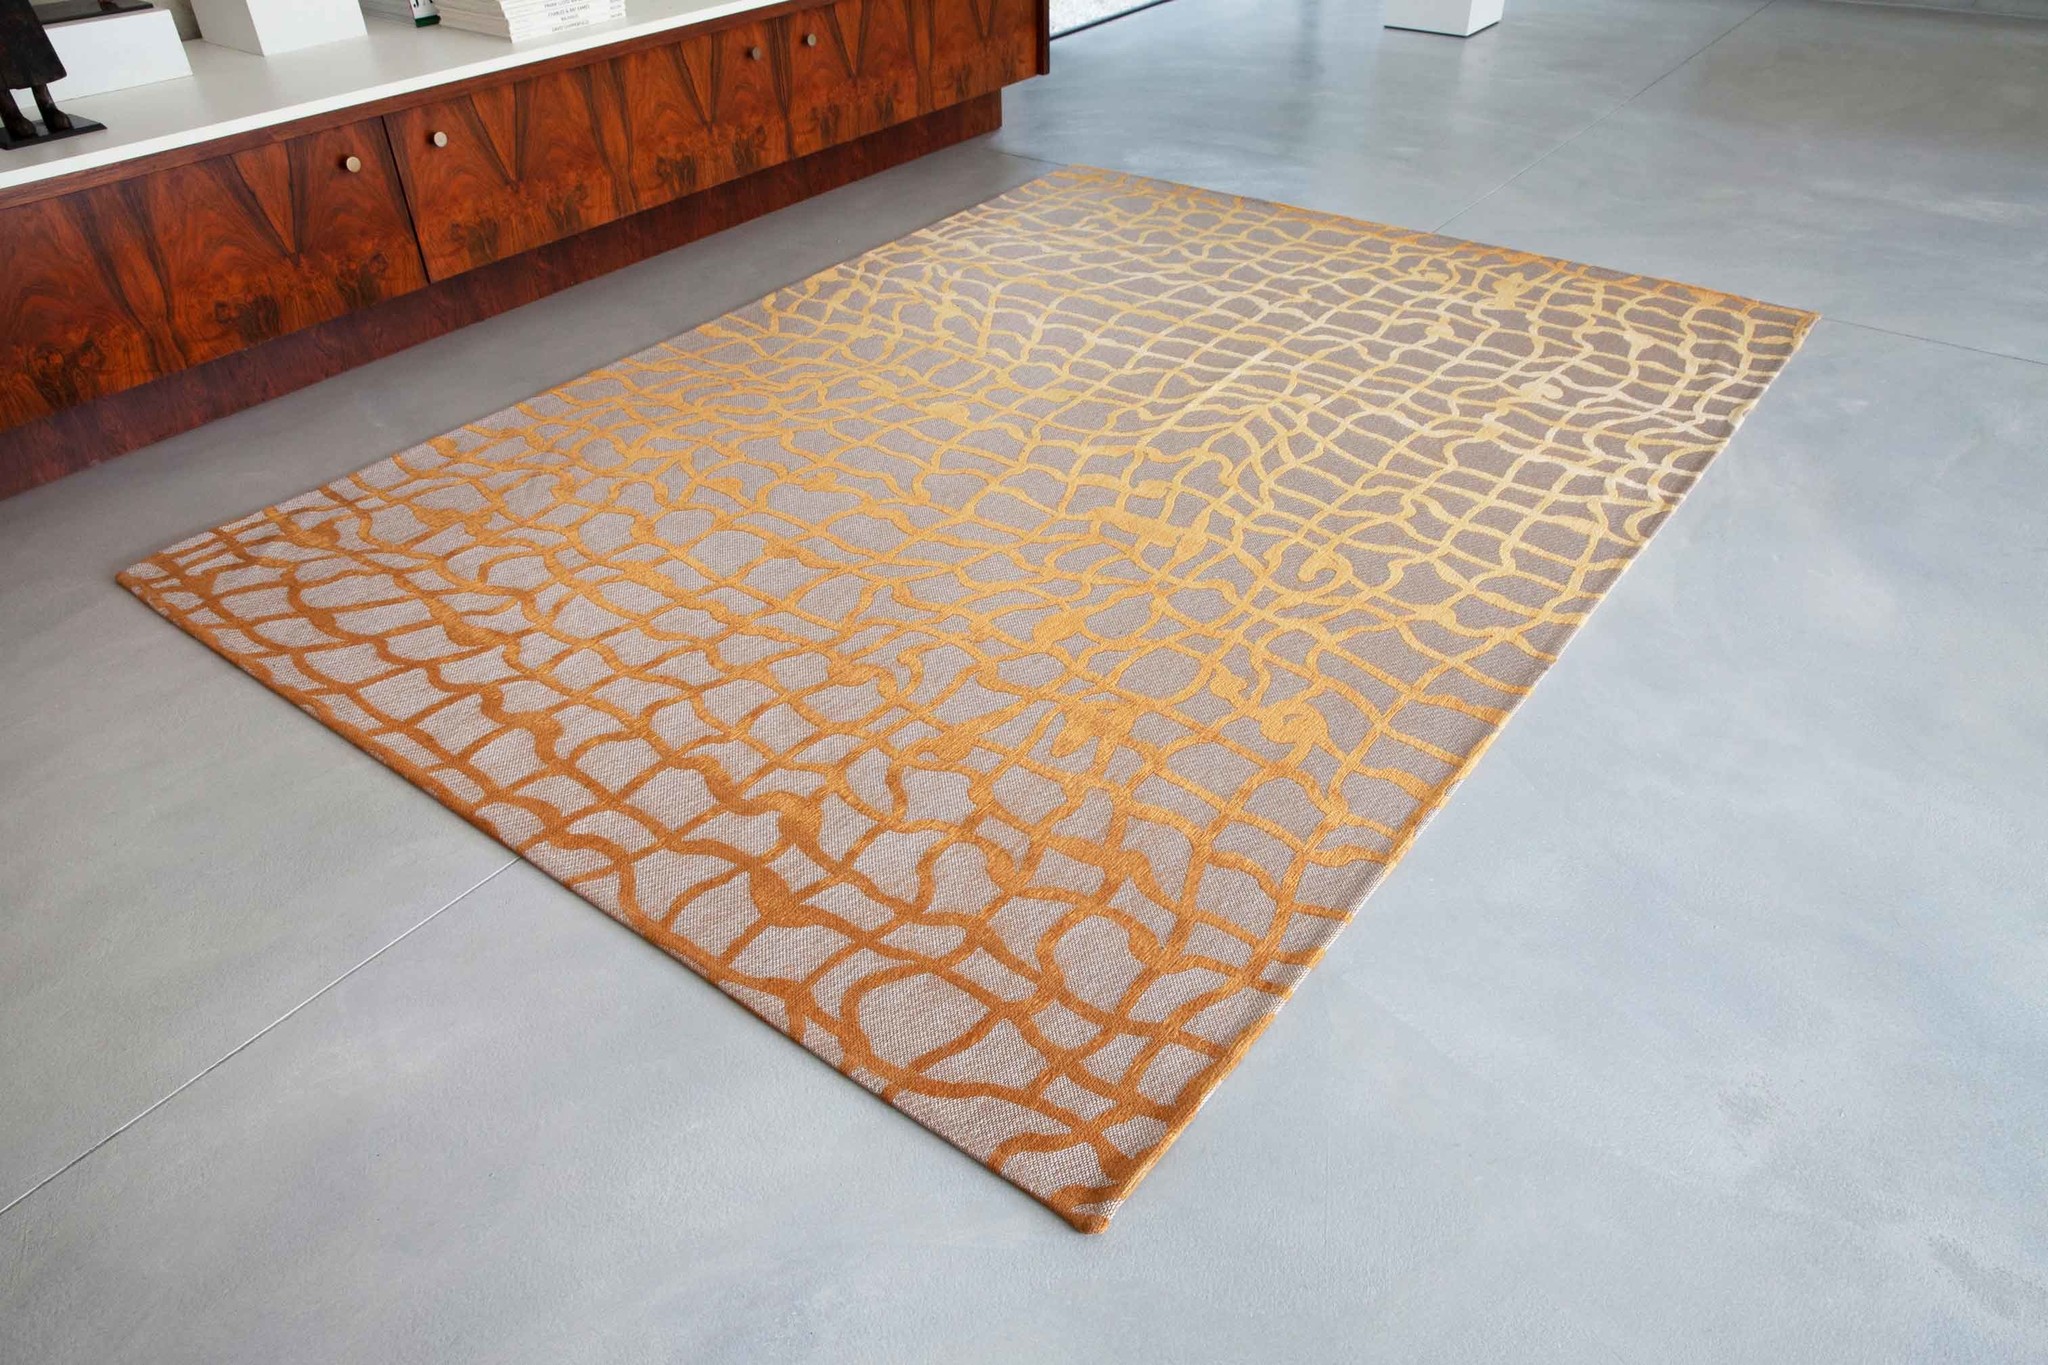 Gold Flatwoven Rug ☞ Size: 2' 7" x 5' (80 x 150 cm)